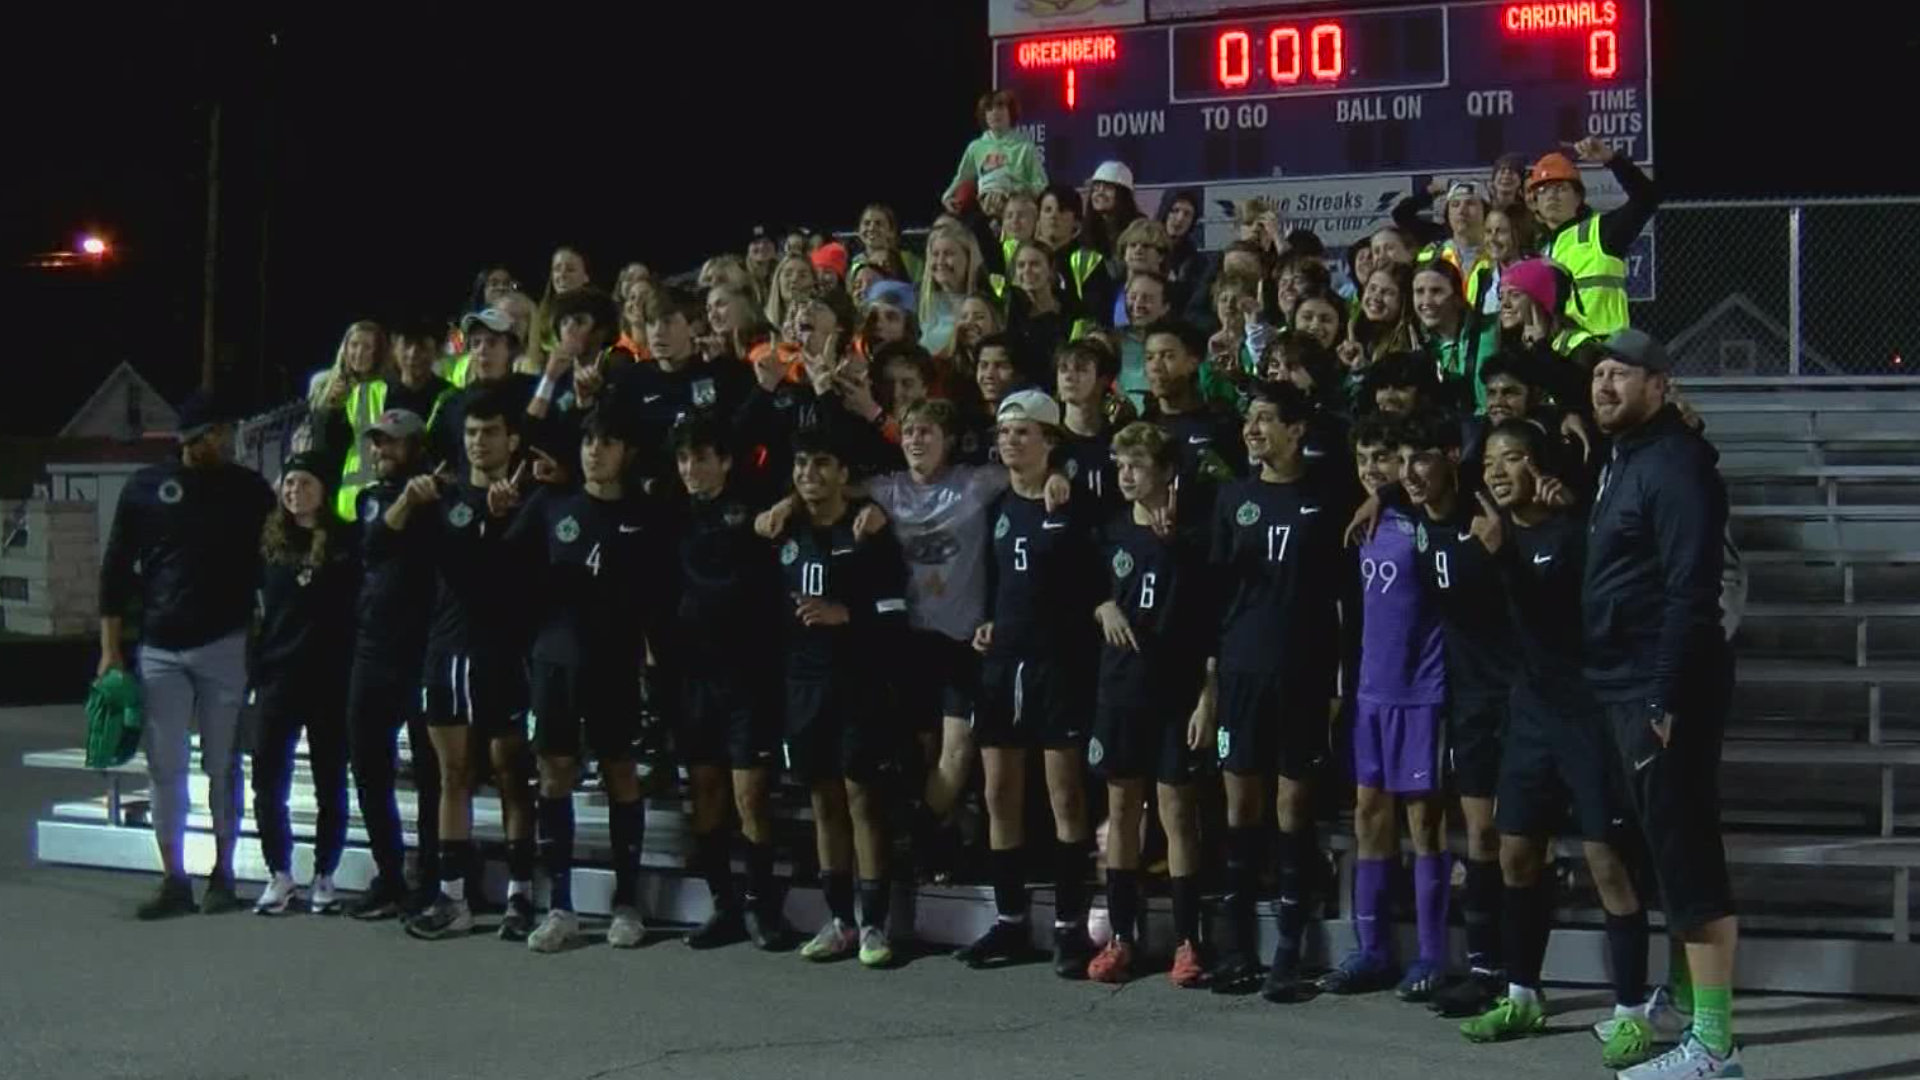 The Green Bears beat Cardinal Mooney 1-0 to advance to Saturday's state title game in Columbus.